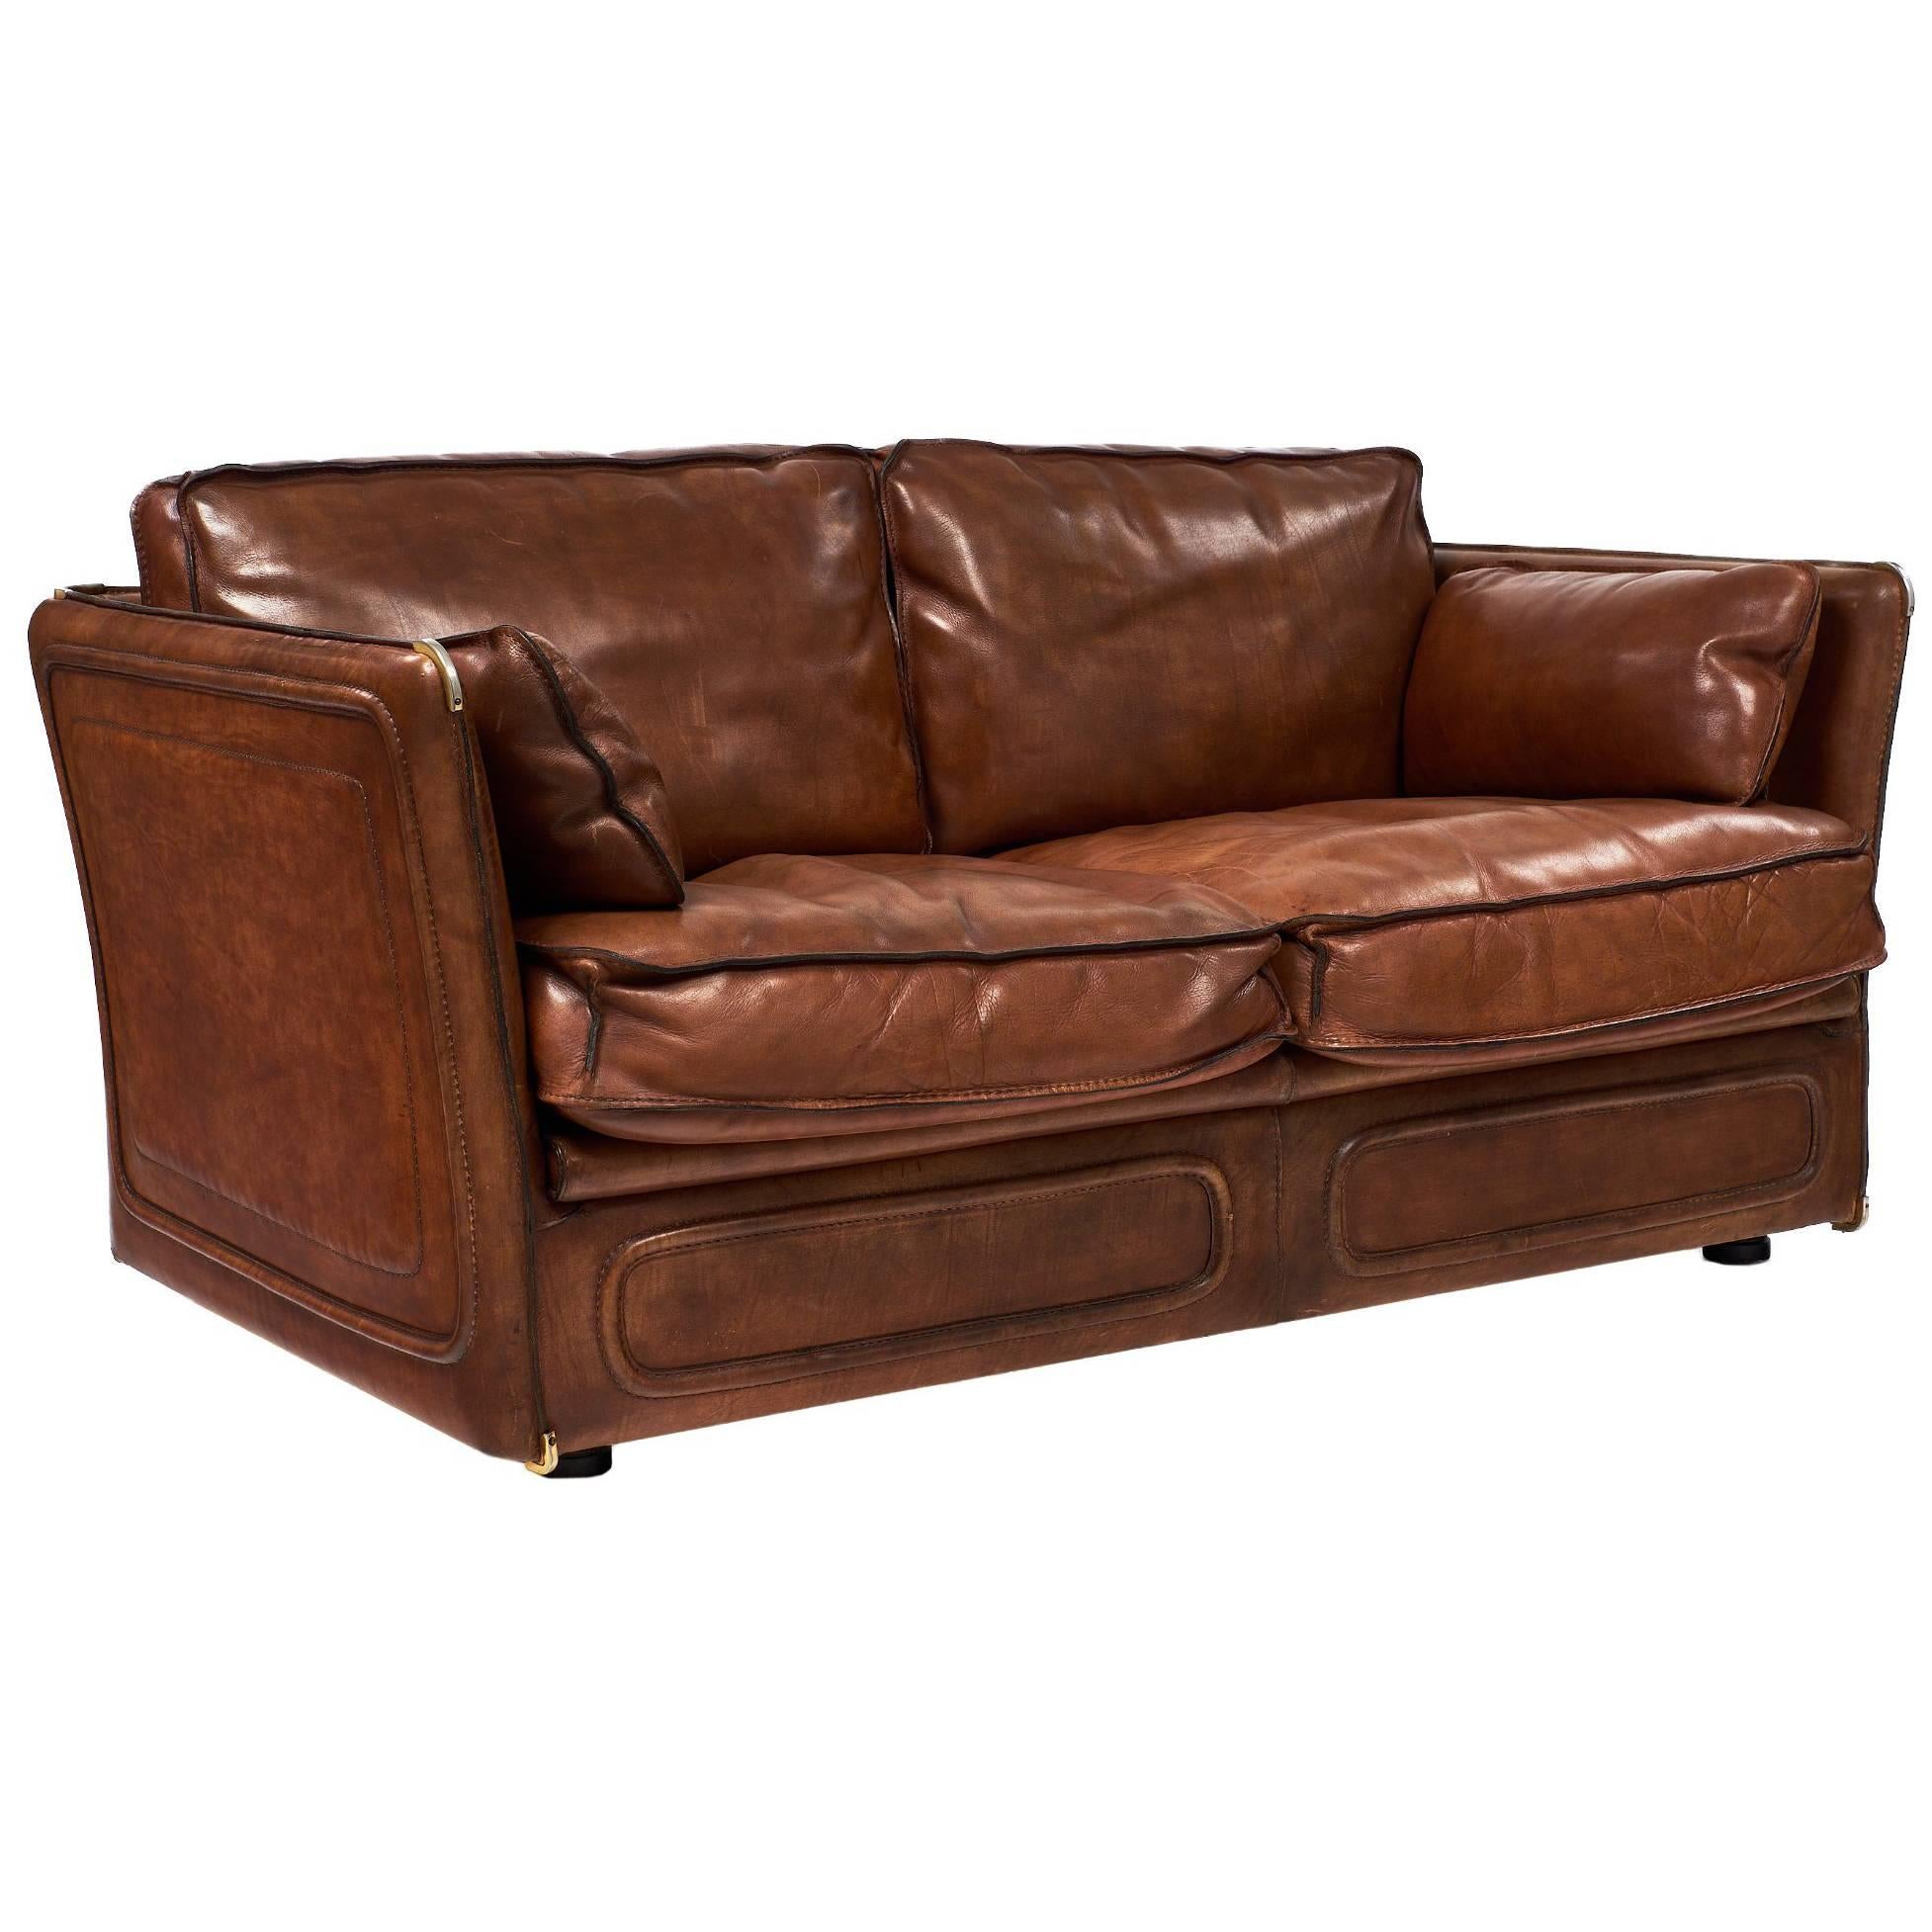 Hermes Style Buffalo Leather French Loveseat